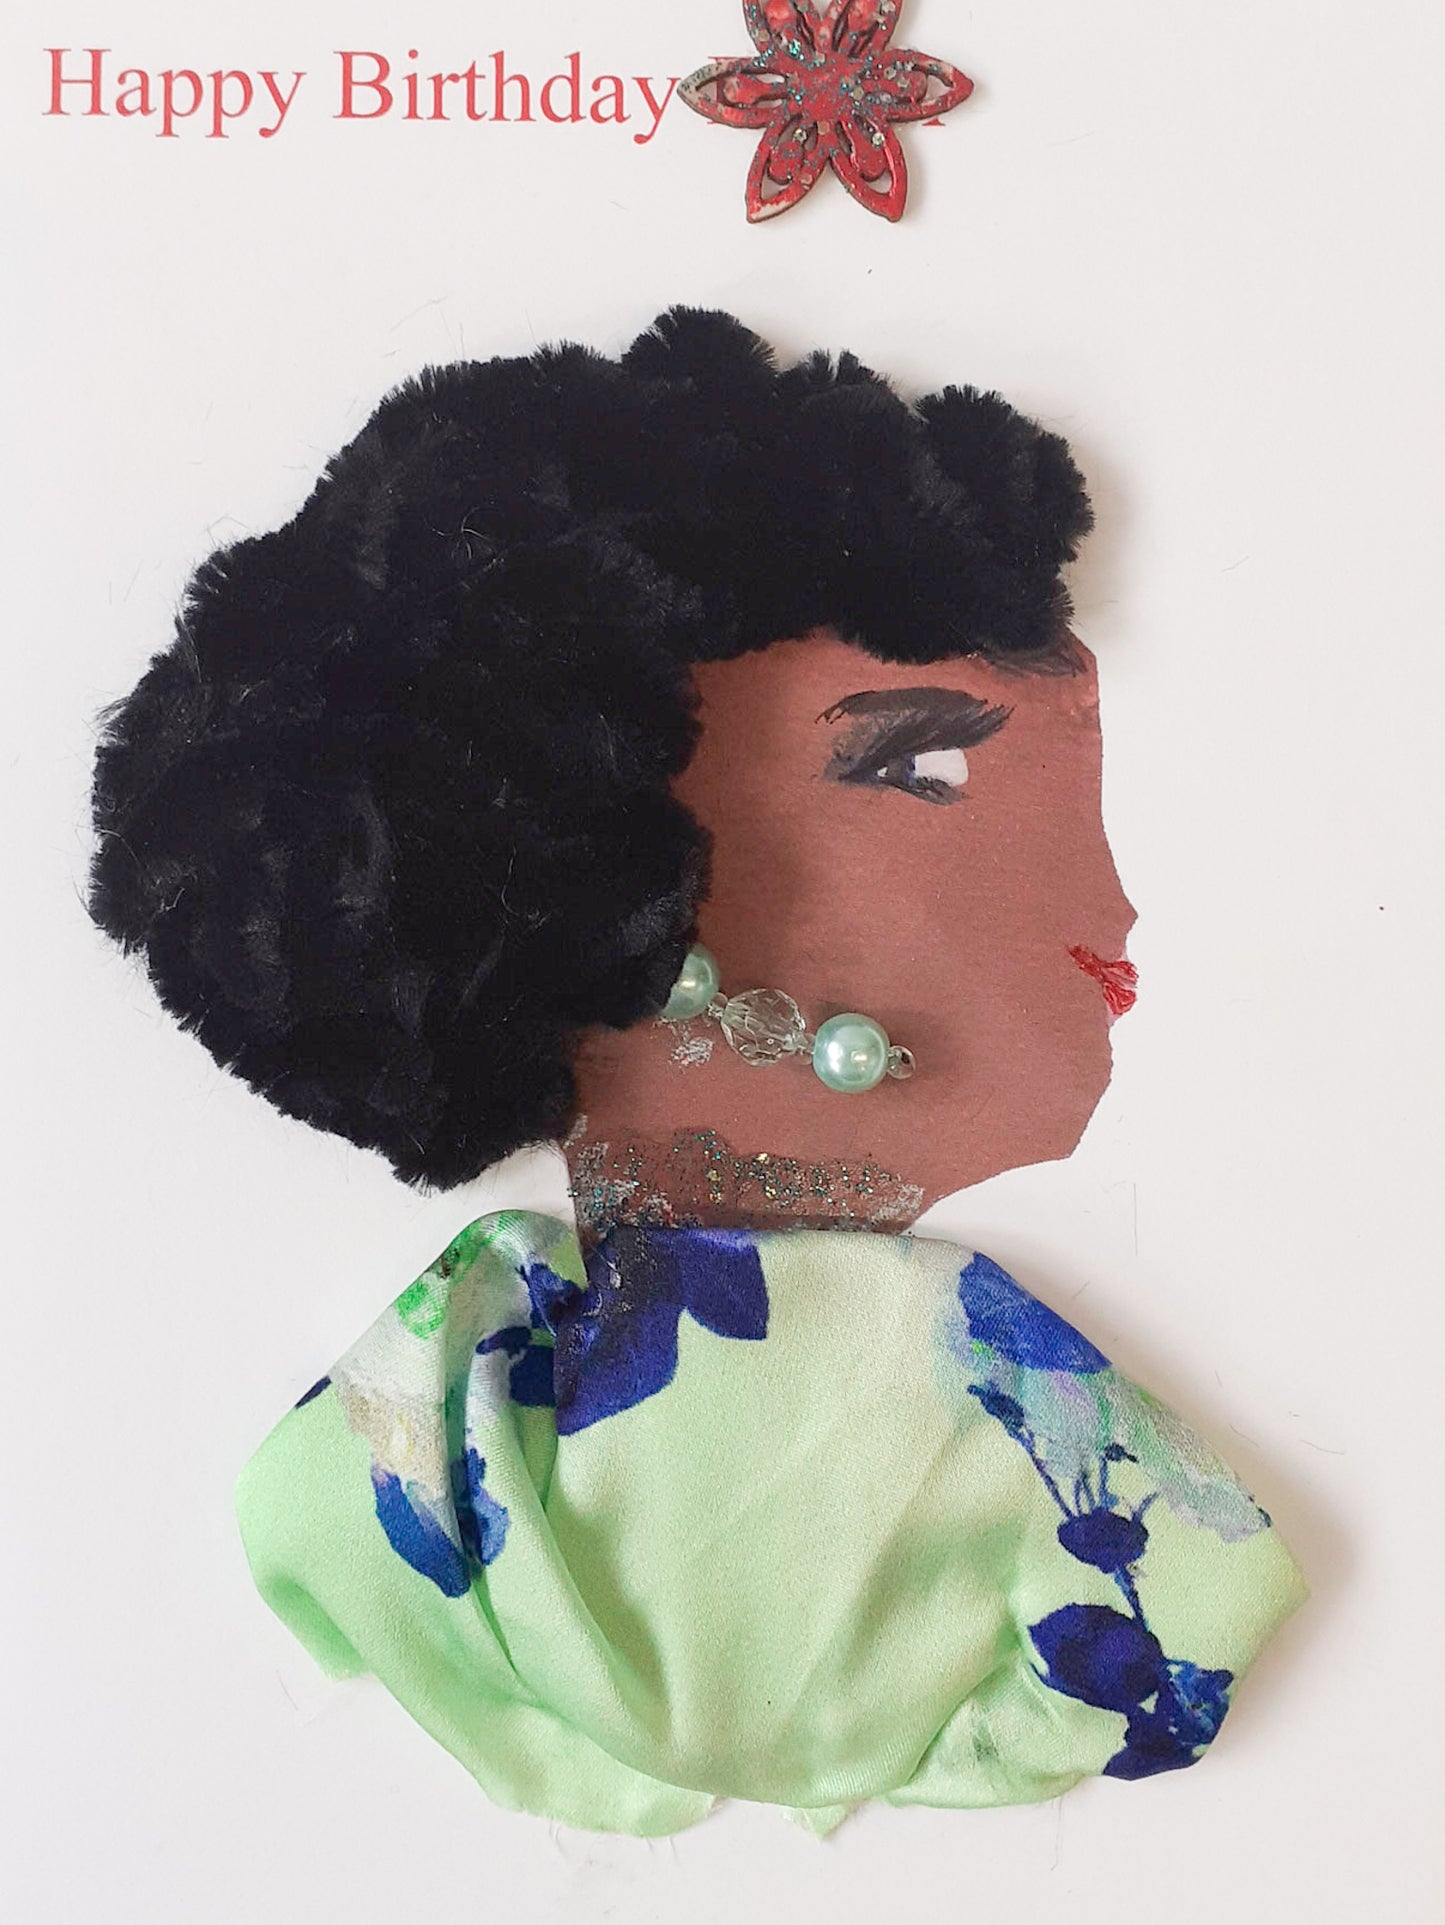 This card displays a woman named Olayinka. She is wearing a light green blouse with a blue plant pattern on it and matching green pearl earrings. Her hair is short, curly, and black, and made of an almost fur like material. On the top left corner, it says happy birthday and there is a red flower next to it. 